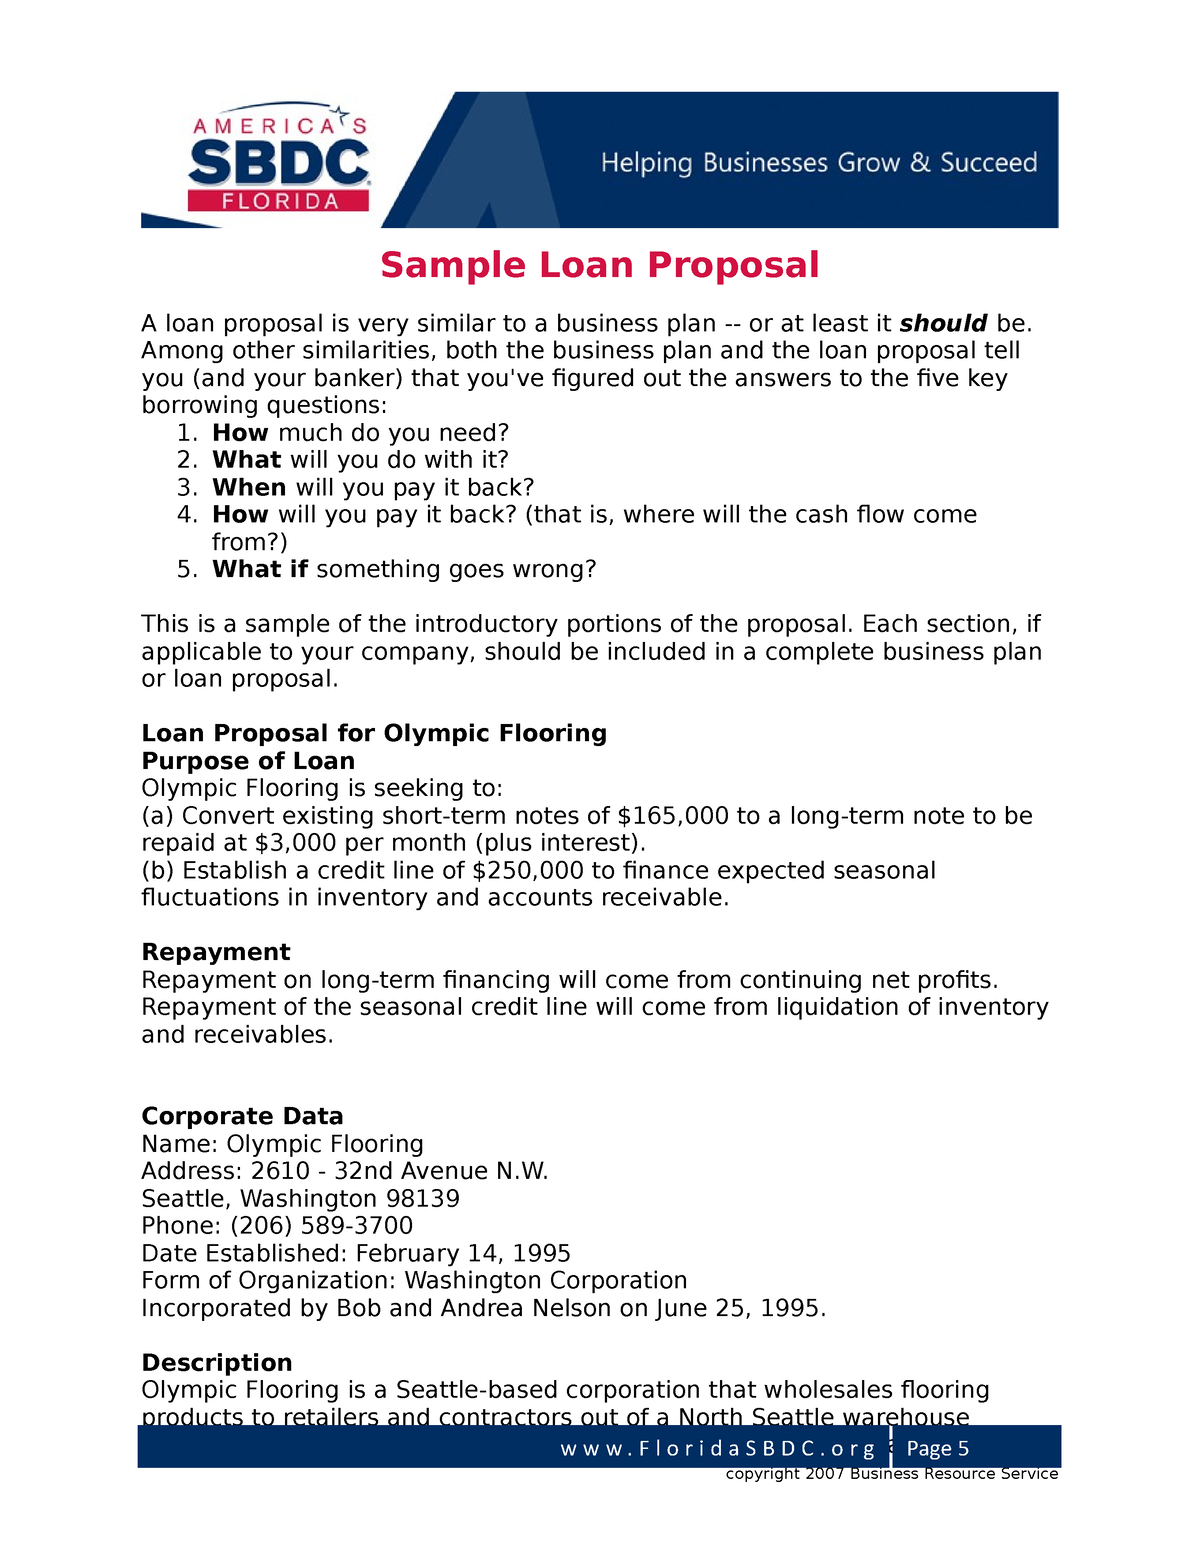 Sample Loan Proposal Sample Loan Proposal A loan proposal is very